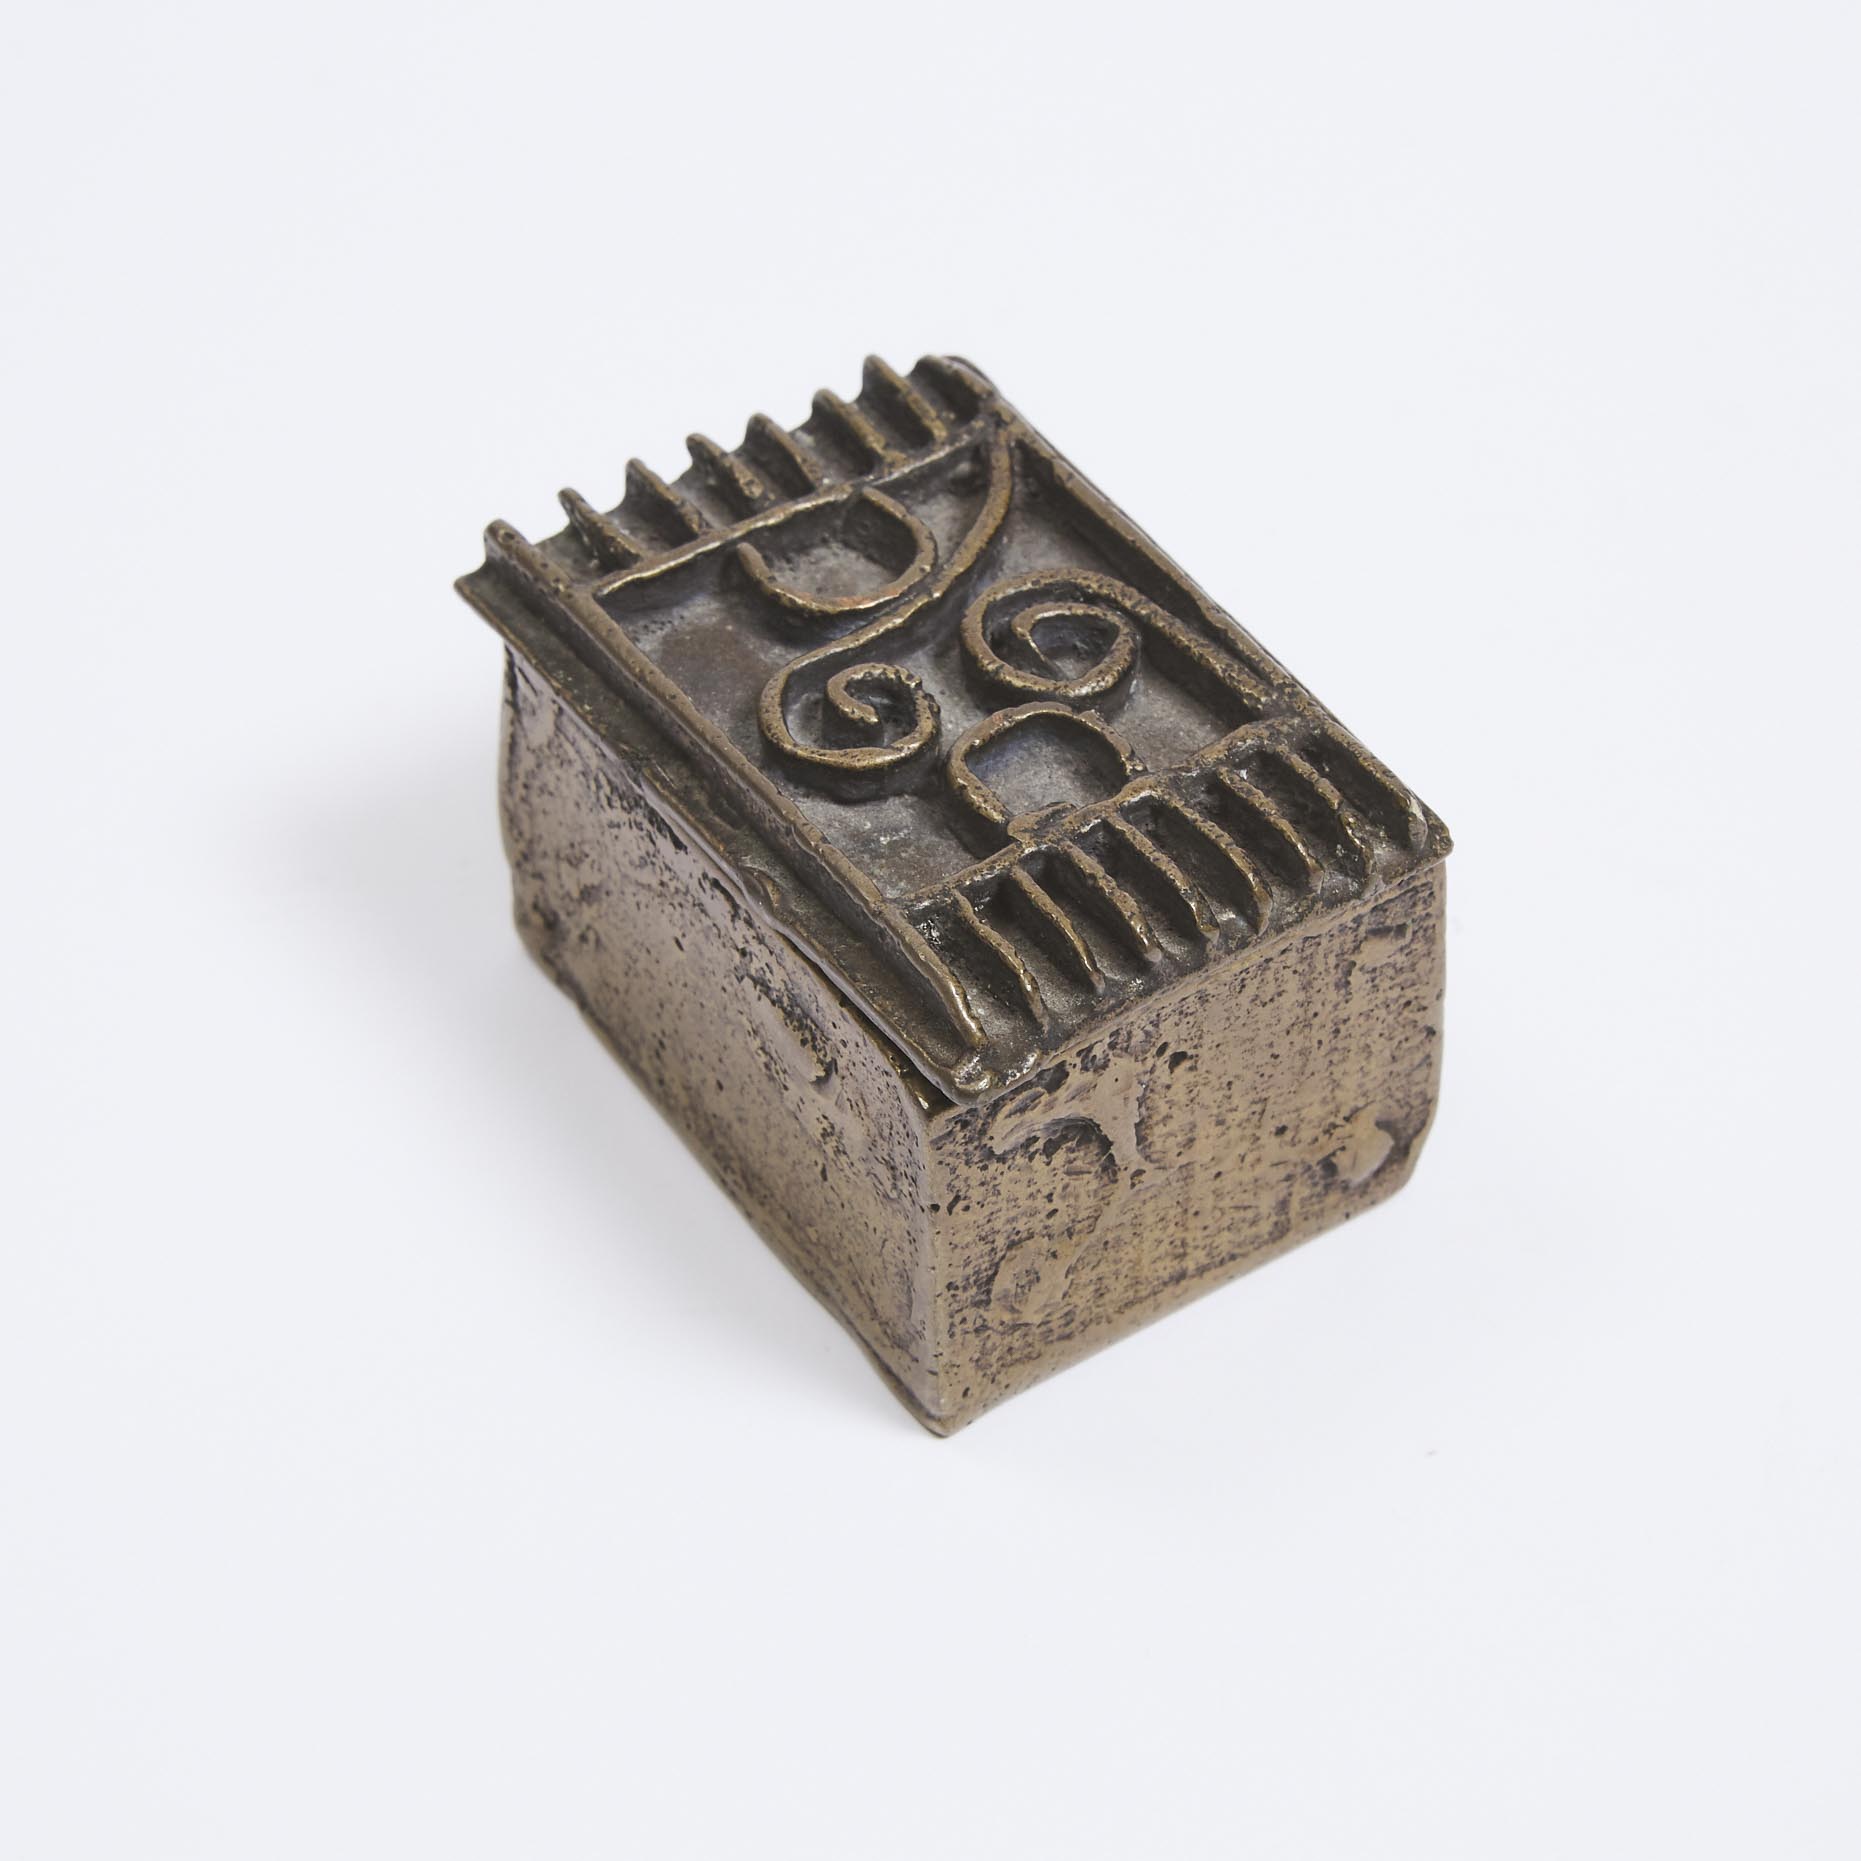 Akan/Ashanti Gold Dust Box, Ghana, West Africa,  late 19th to early 20th century